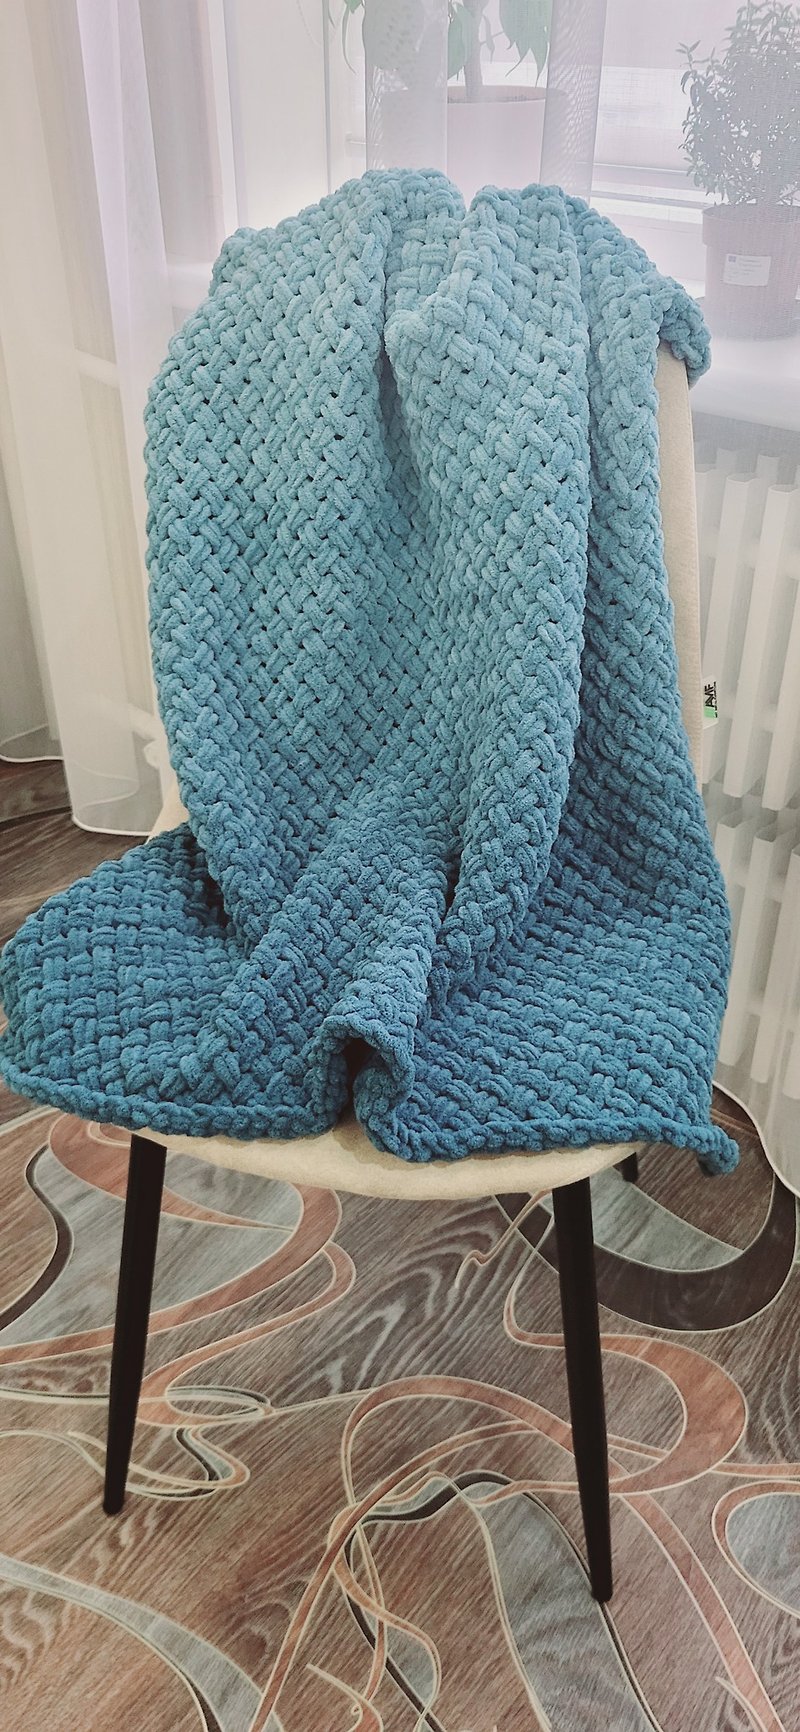 knitted handmade blanket (plaid) ombre mint color, size 85x85 - 棉被/毛毯 - 聚酯纖維 